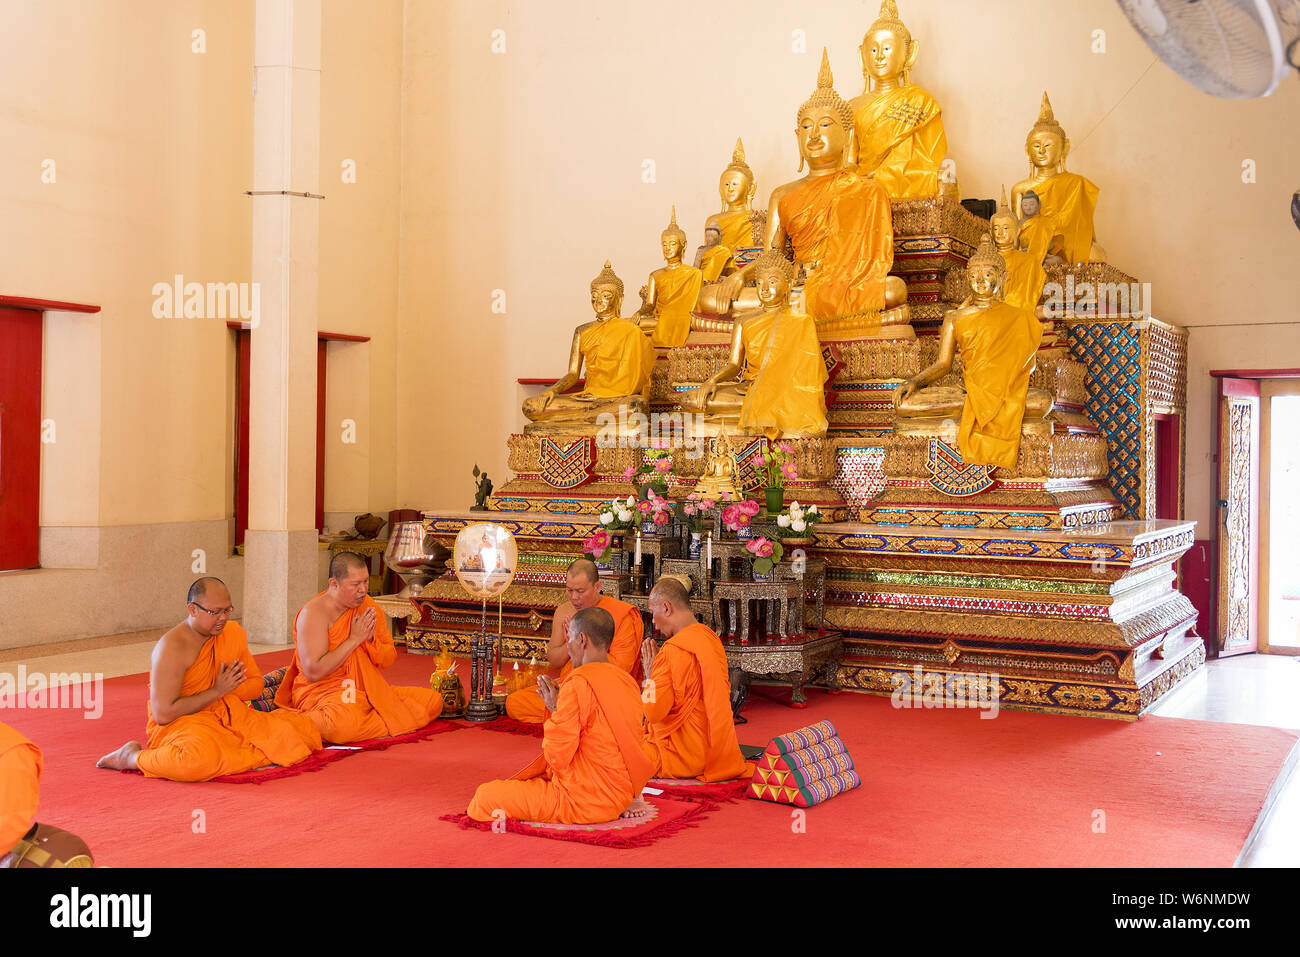 Phuket, Thailand, 04/19/2019 - Group of buddhist monks praying together at the Chalong Temple. Stock Photo